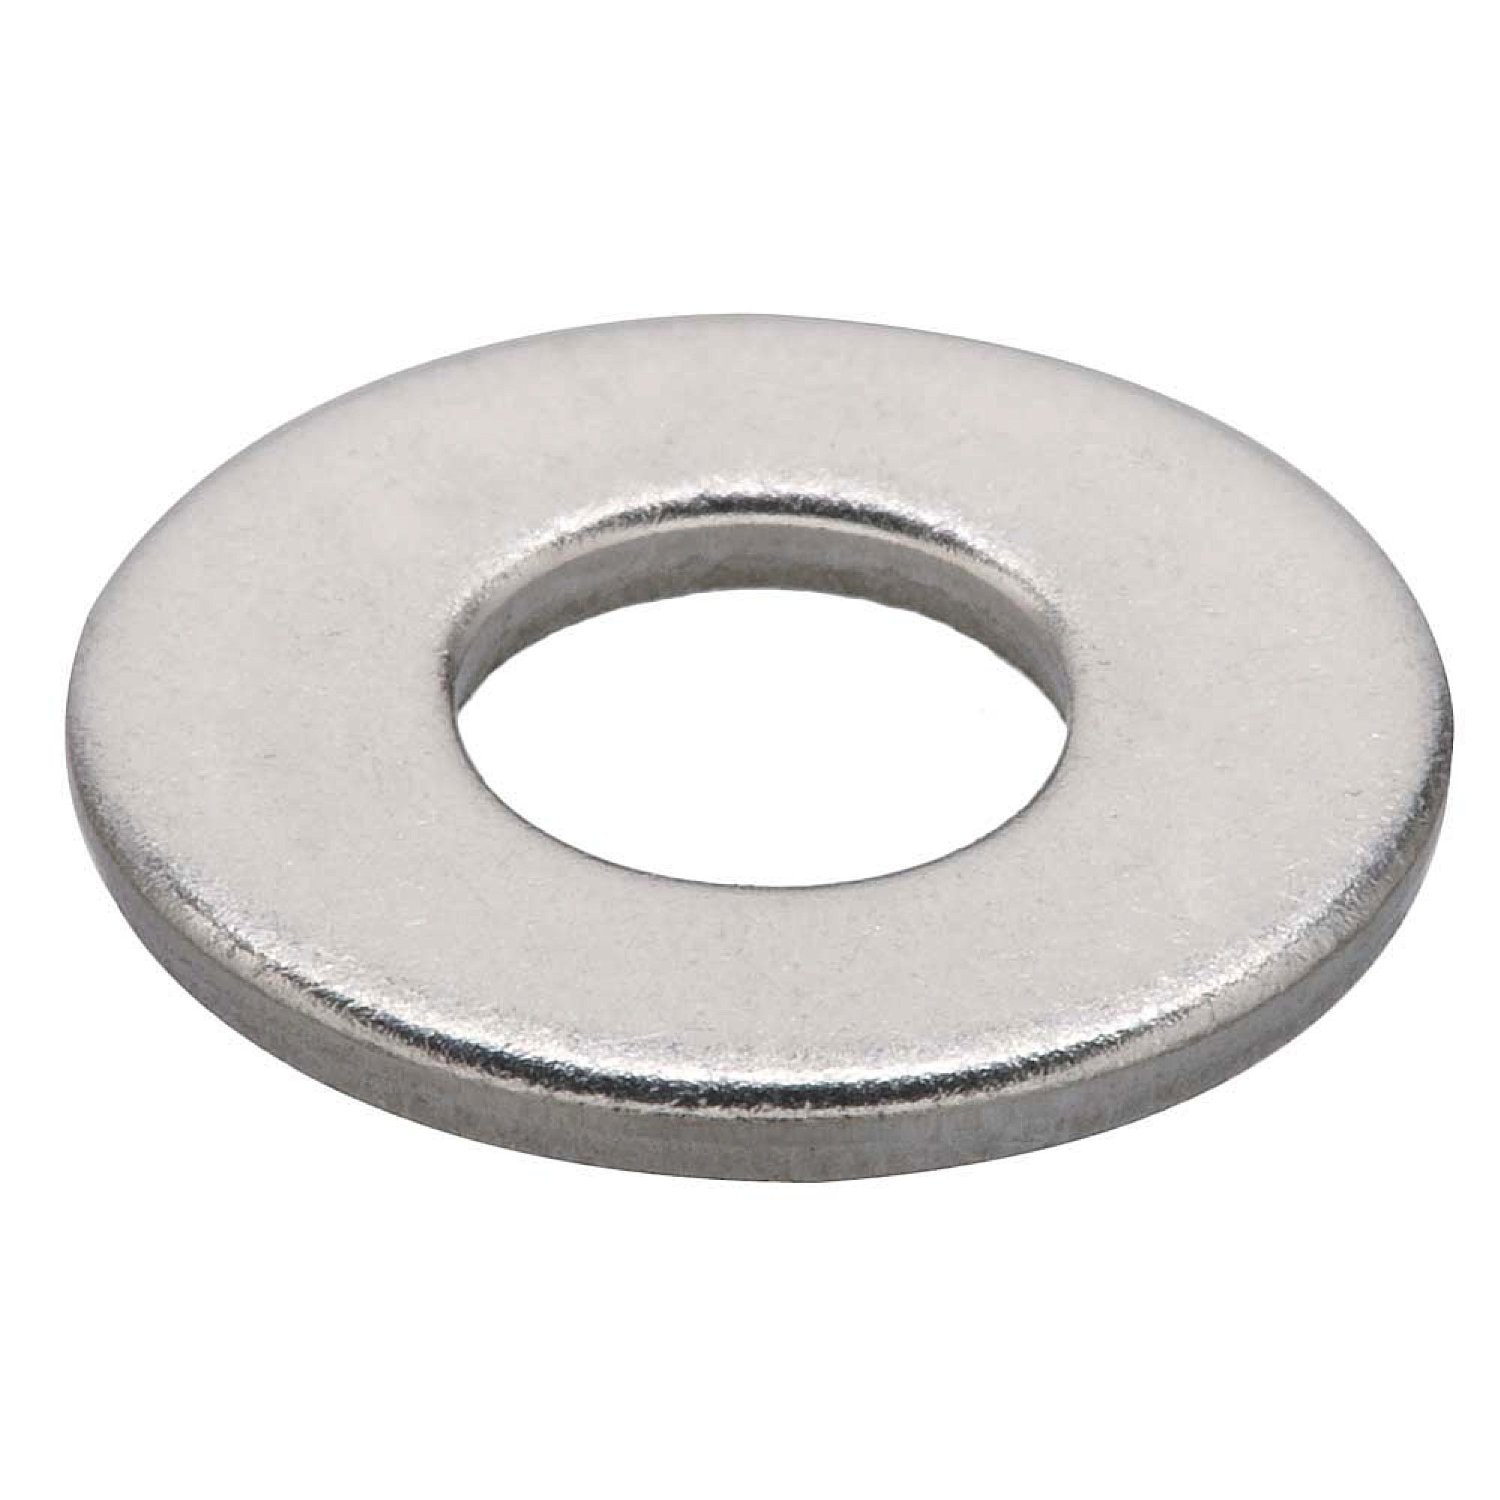 100pcs M2*5*0.5 304 A2 Stainless Steel Flat Washers Gasket Pad Metric DIN125 